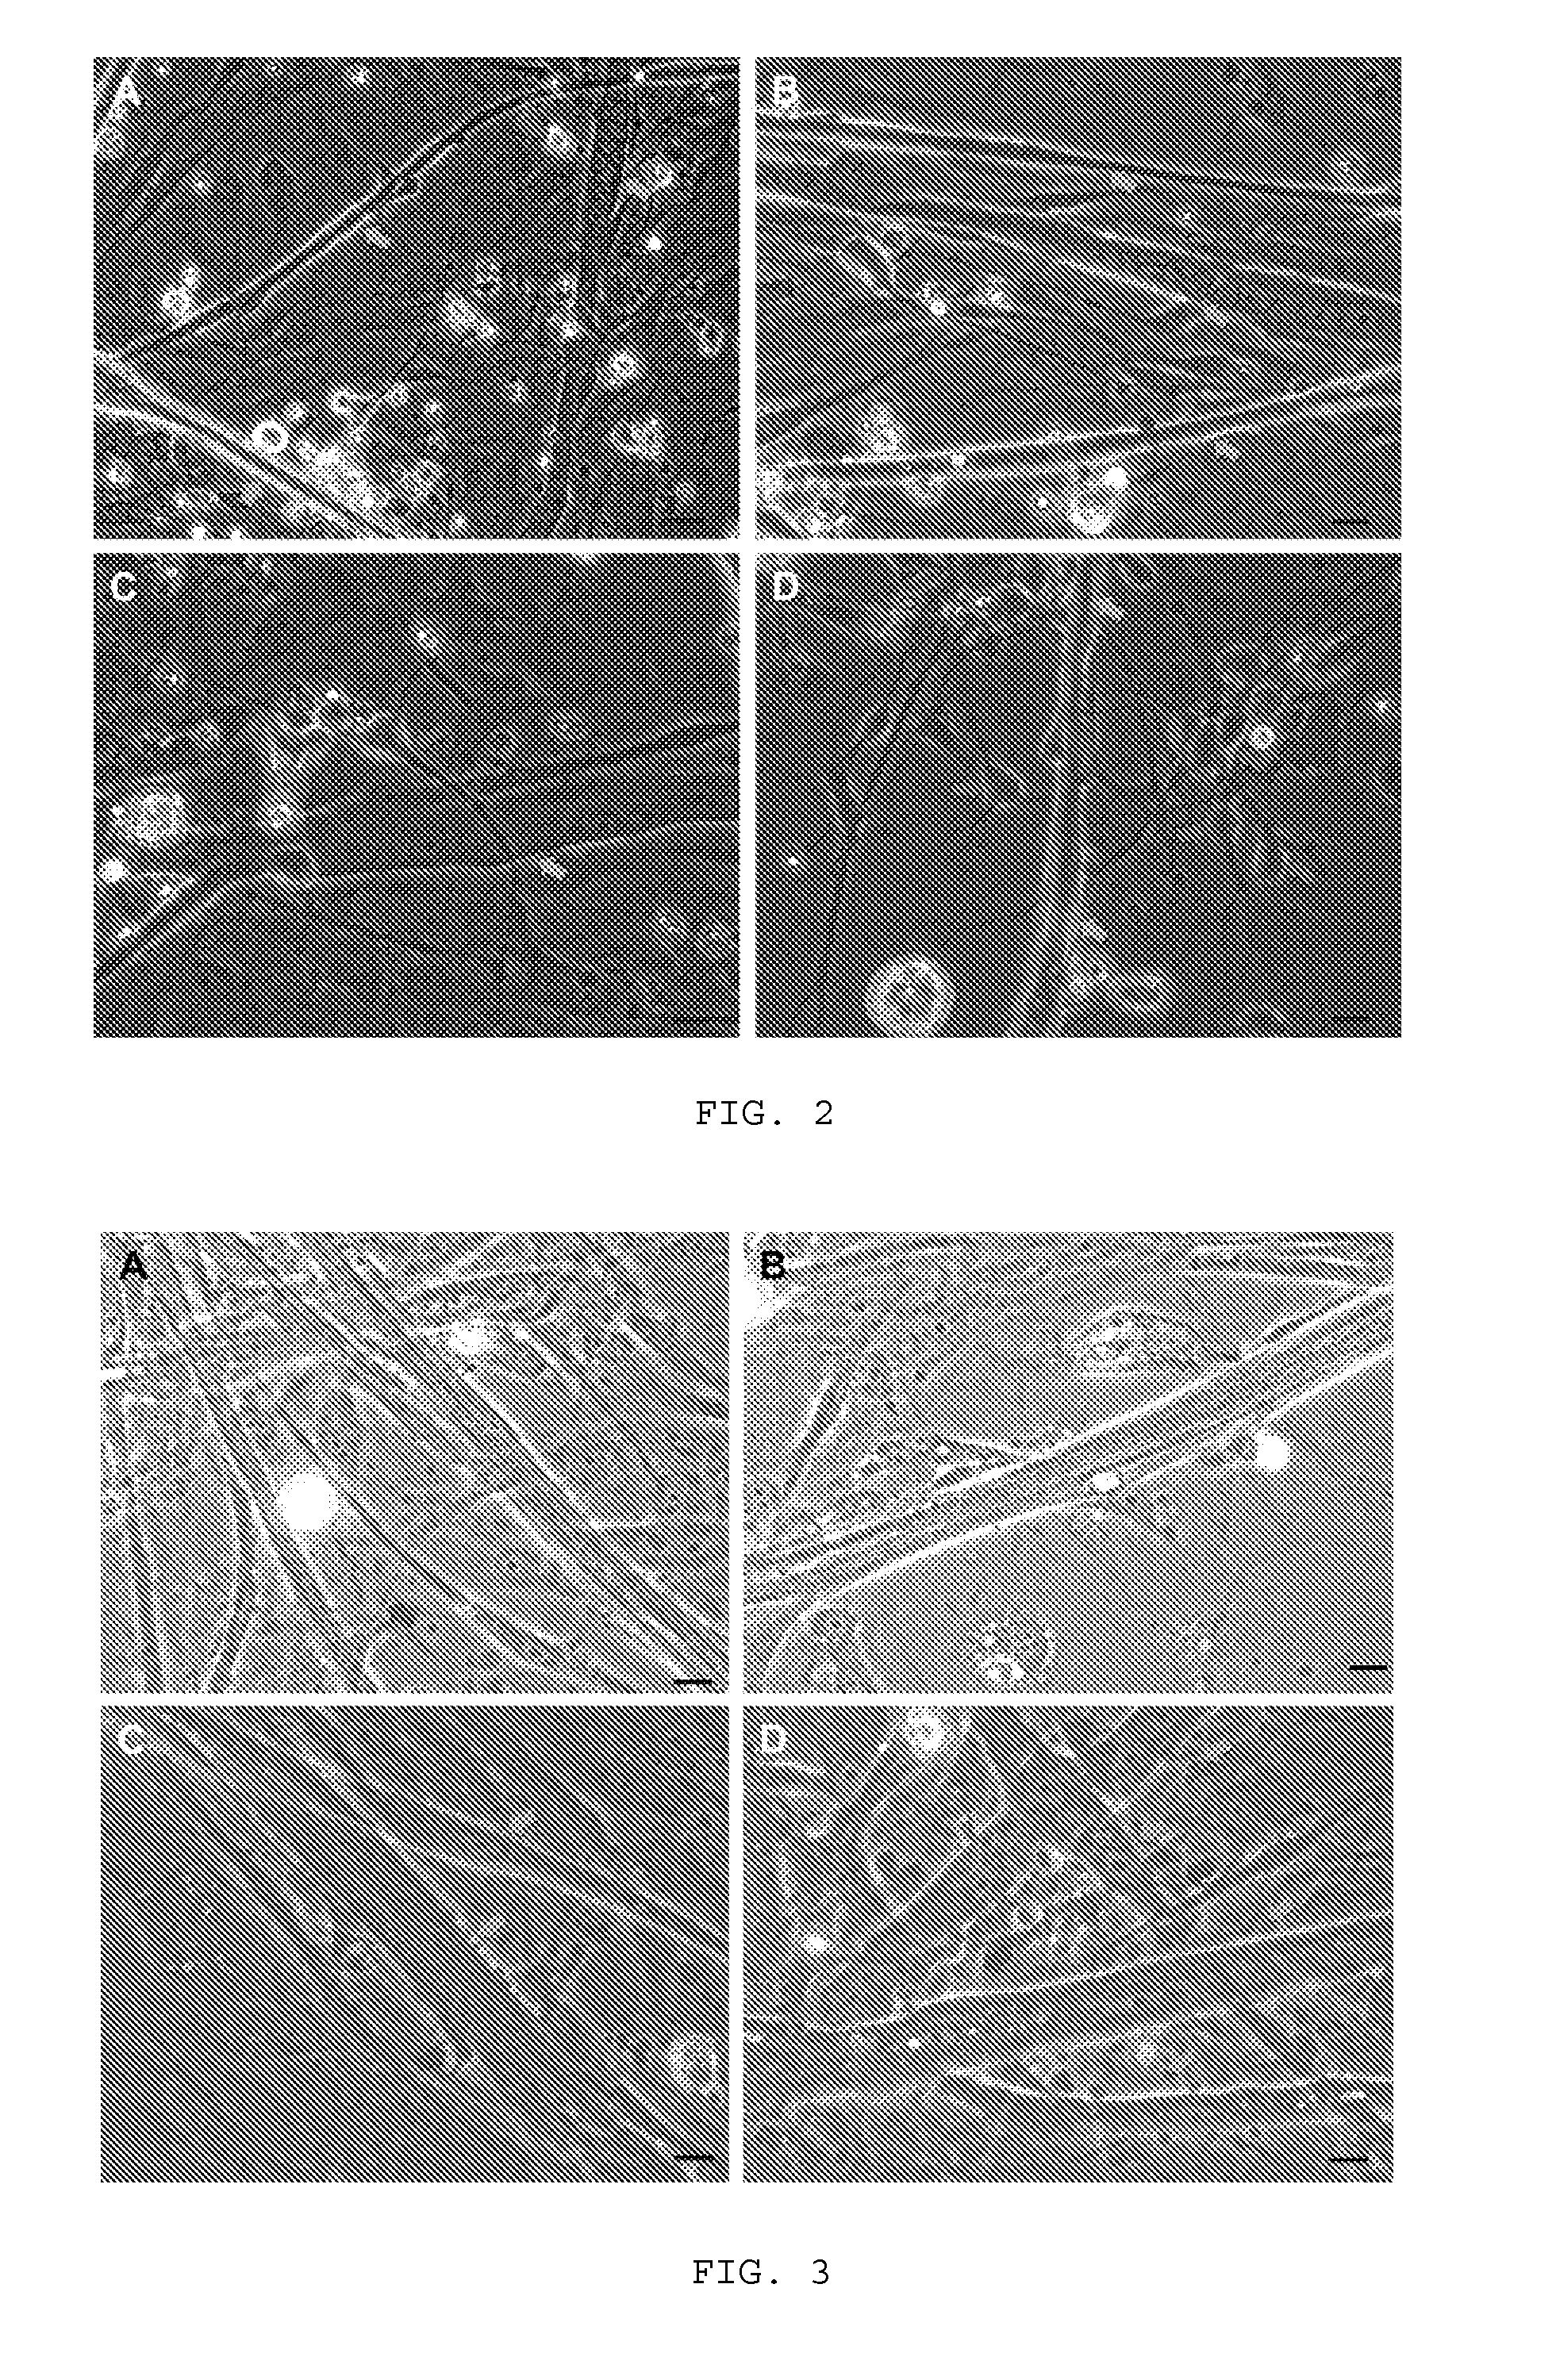 Method of co-culturing mammalian muscle cells and motoneurons